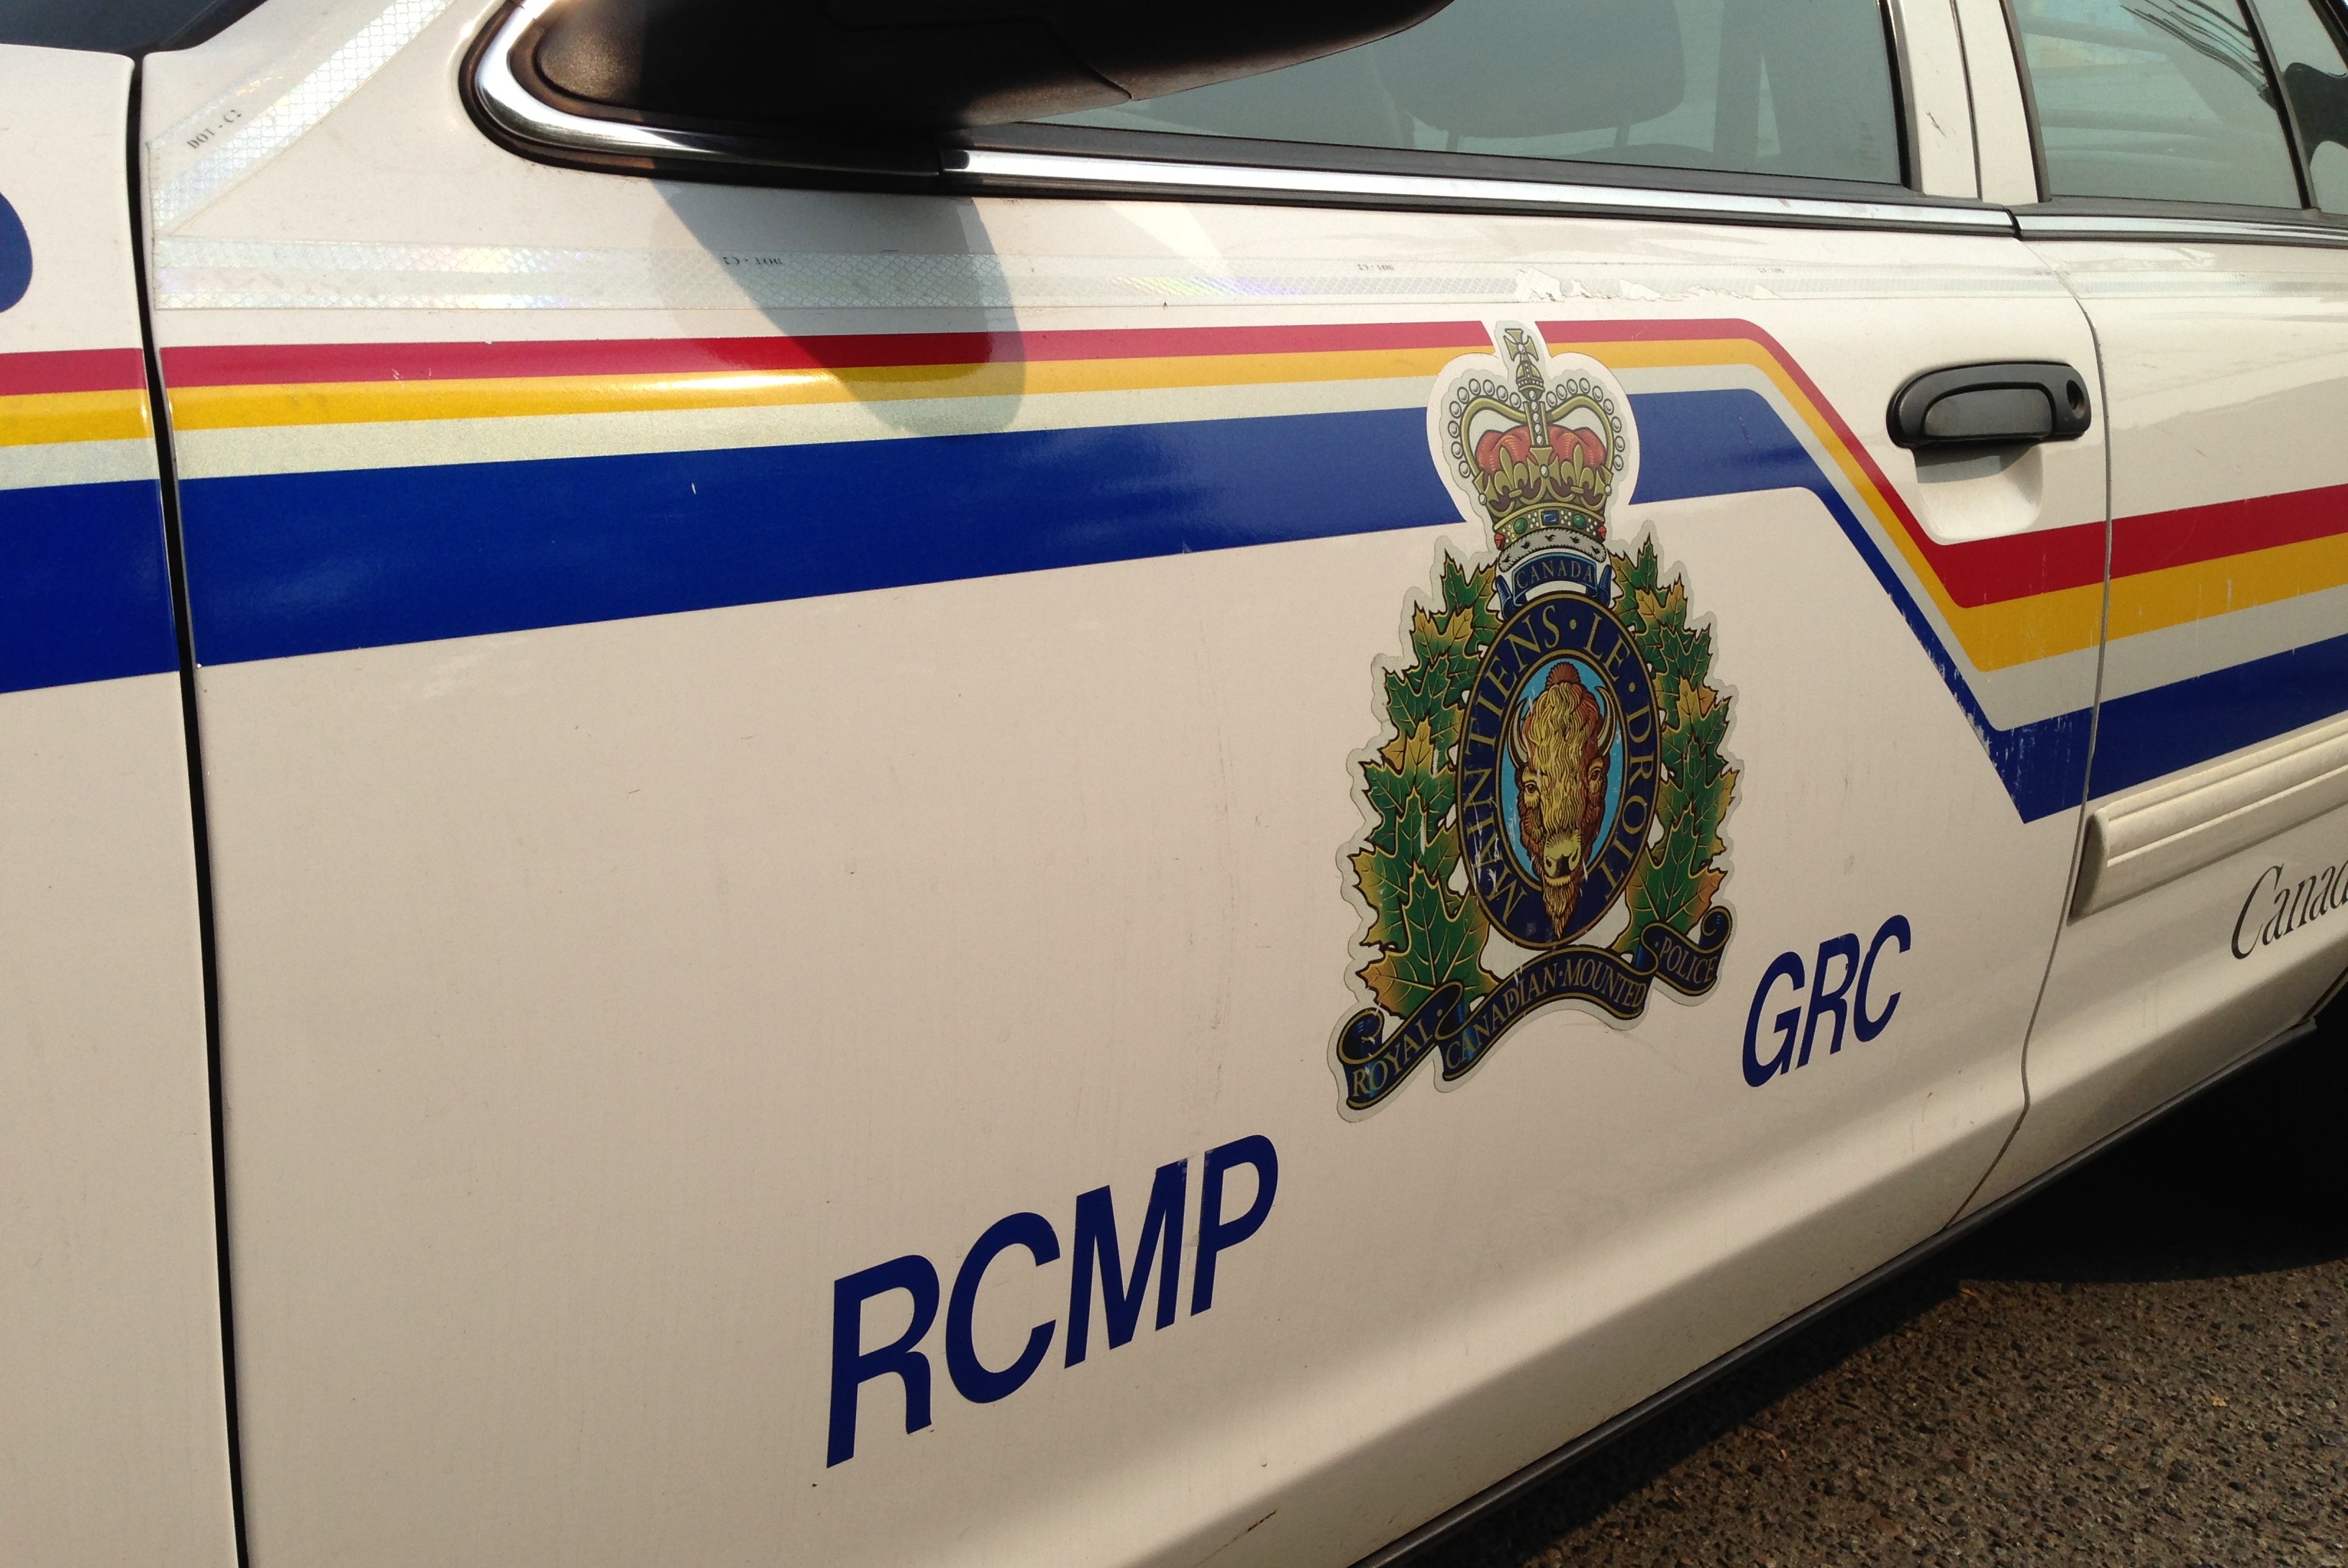 File: The side of an Alberta RCMP vehcile.